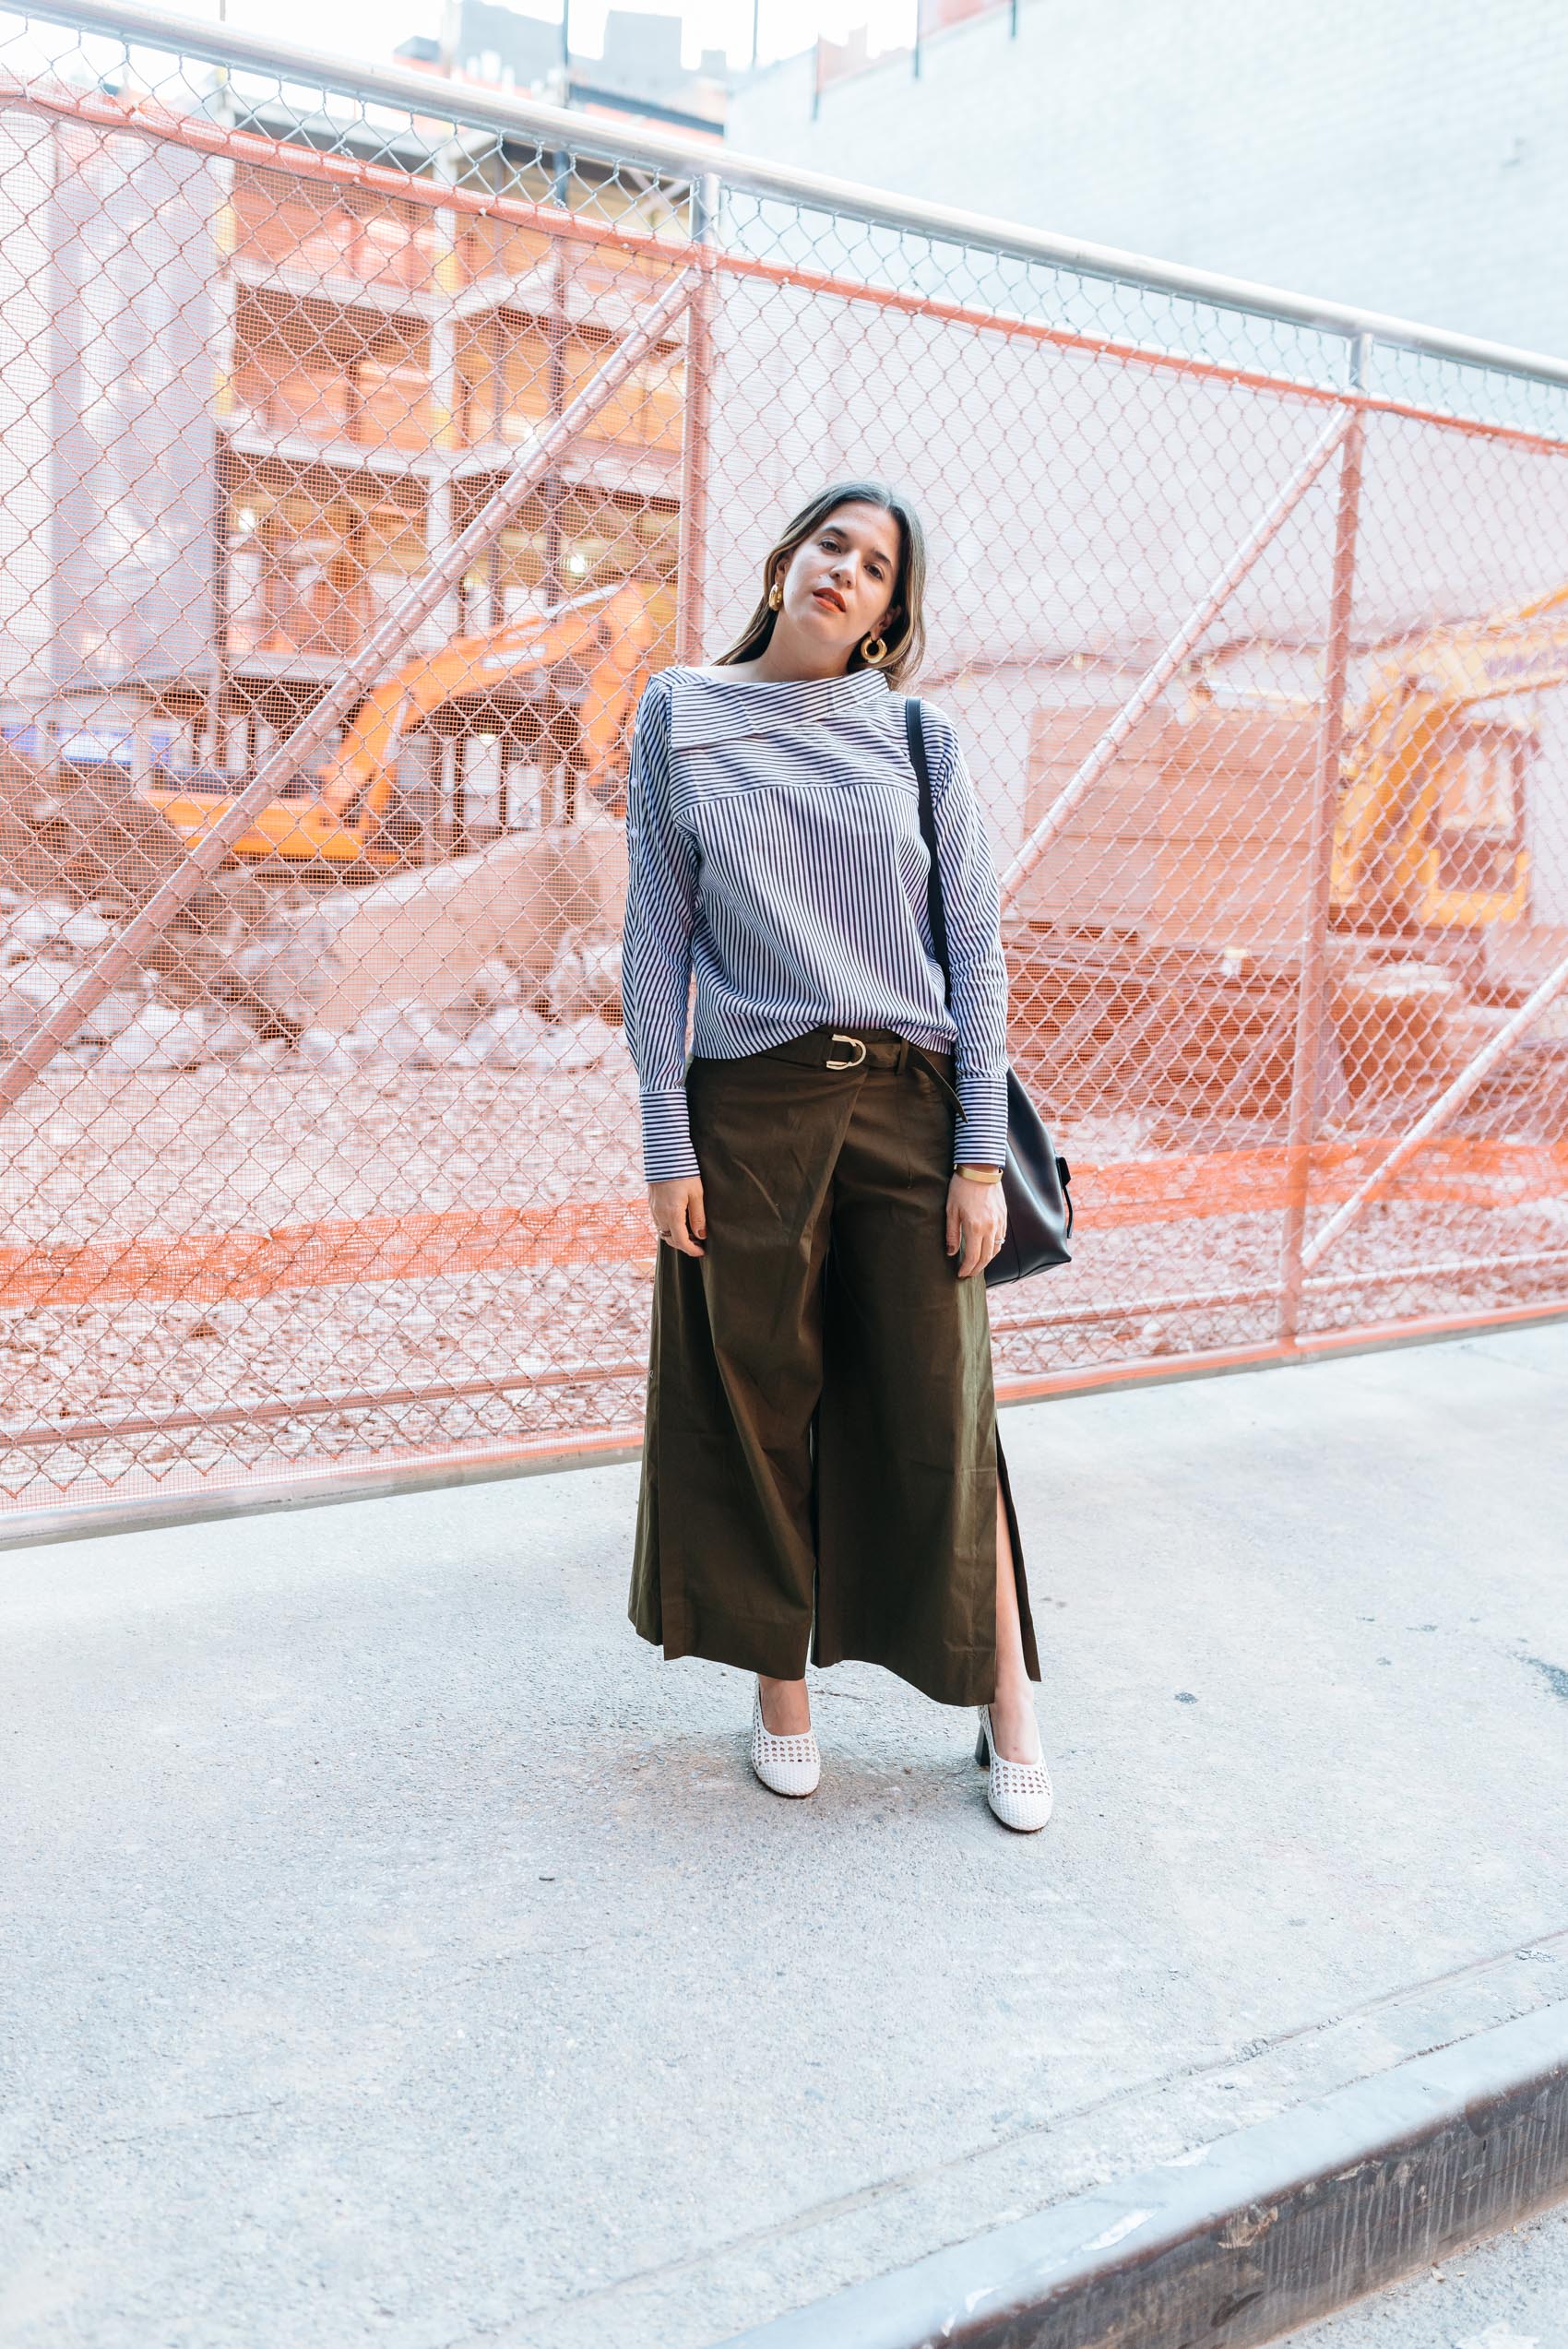 Maristella at NYFW in a casual chic outfit with wide leg olive pants with slit legs from Zara